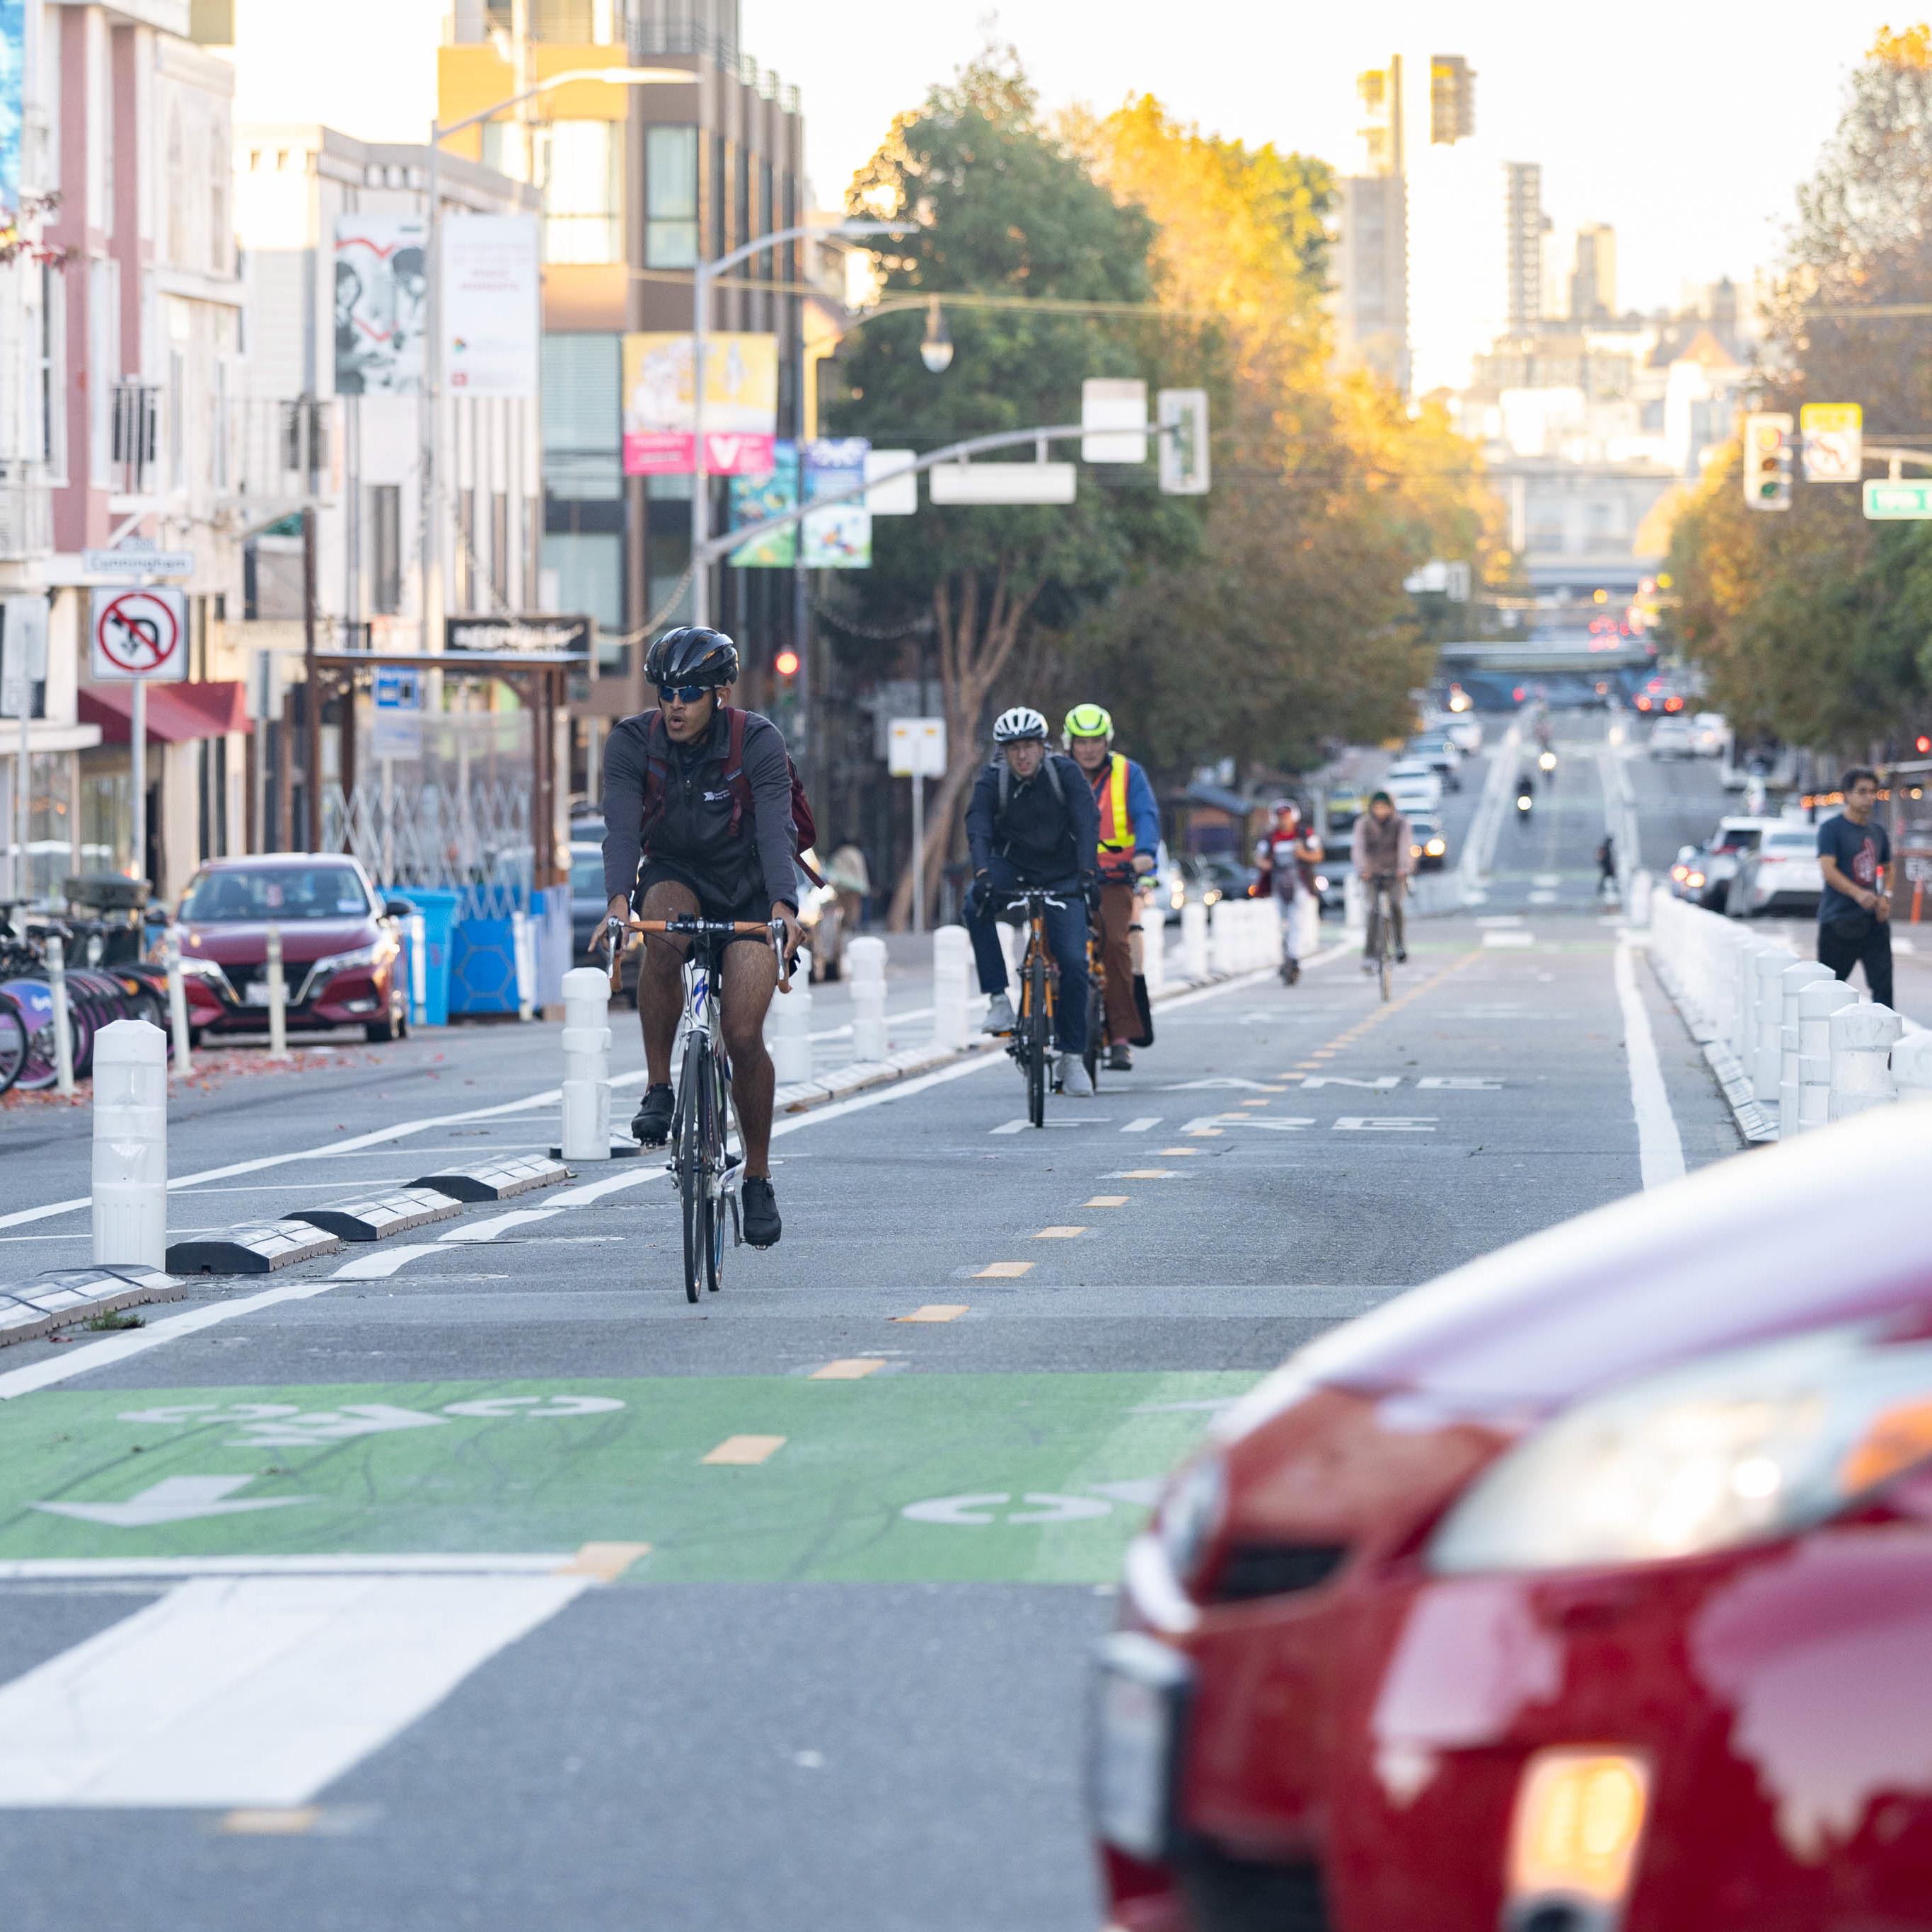 This image shows a city street with several cyclists riding in a dedicated bike lane, separated from cars by plastic bollards. In the background, there are buildings and trees.